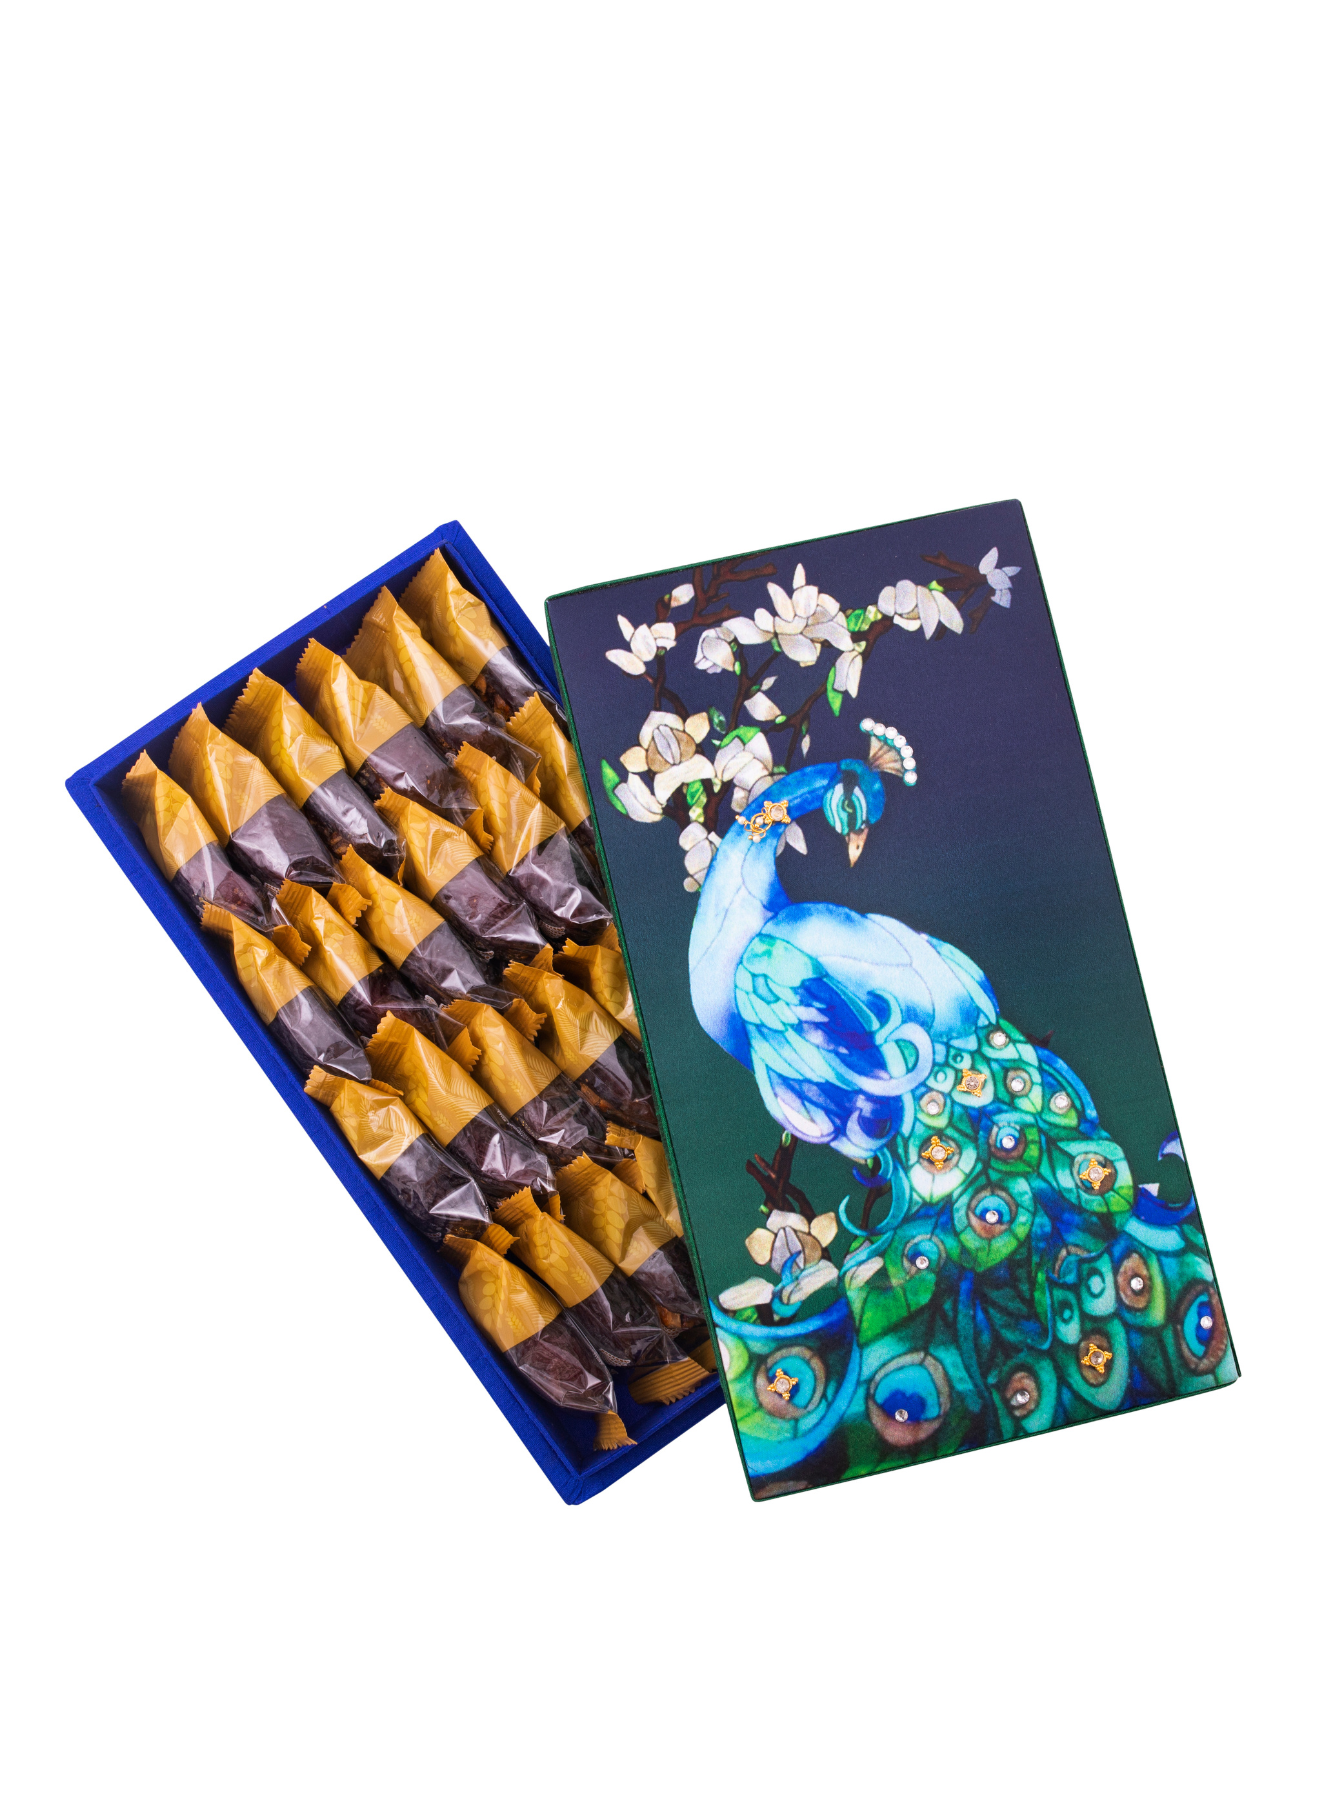 Safawi Dates with Small Silk Peacock Box (21 Pcs)